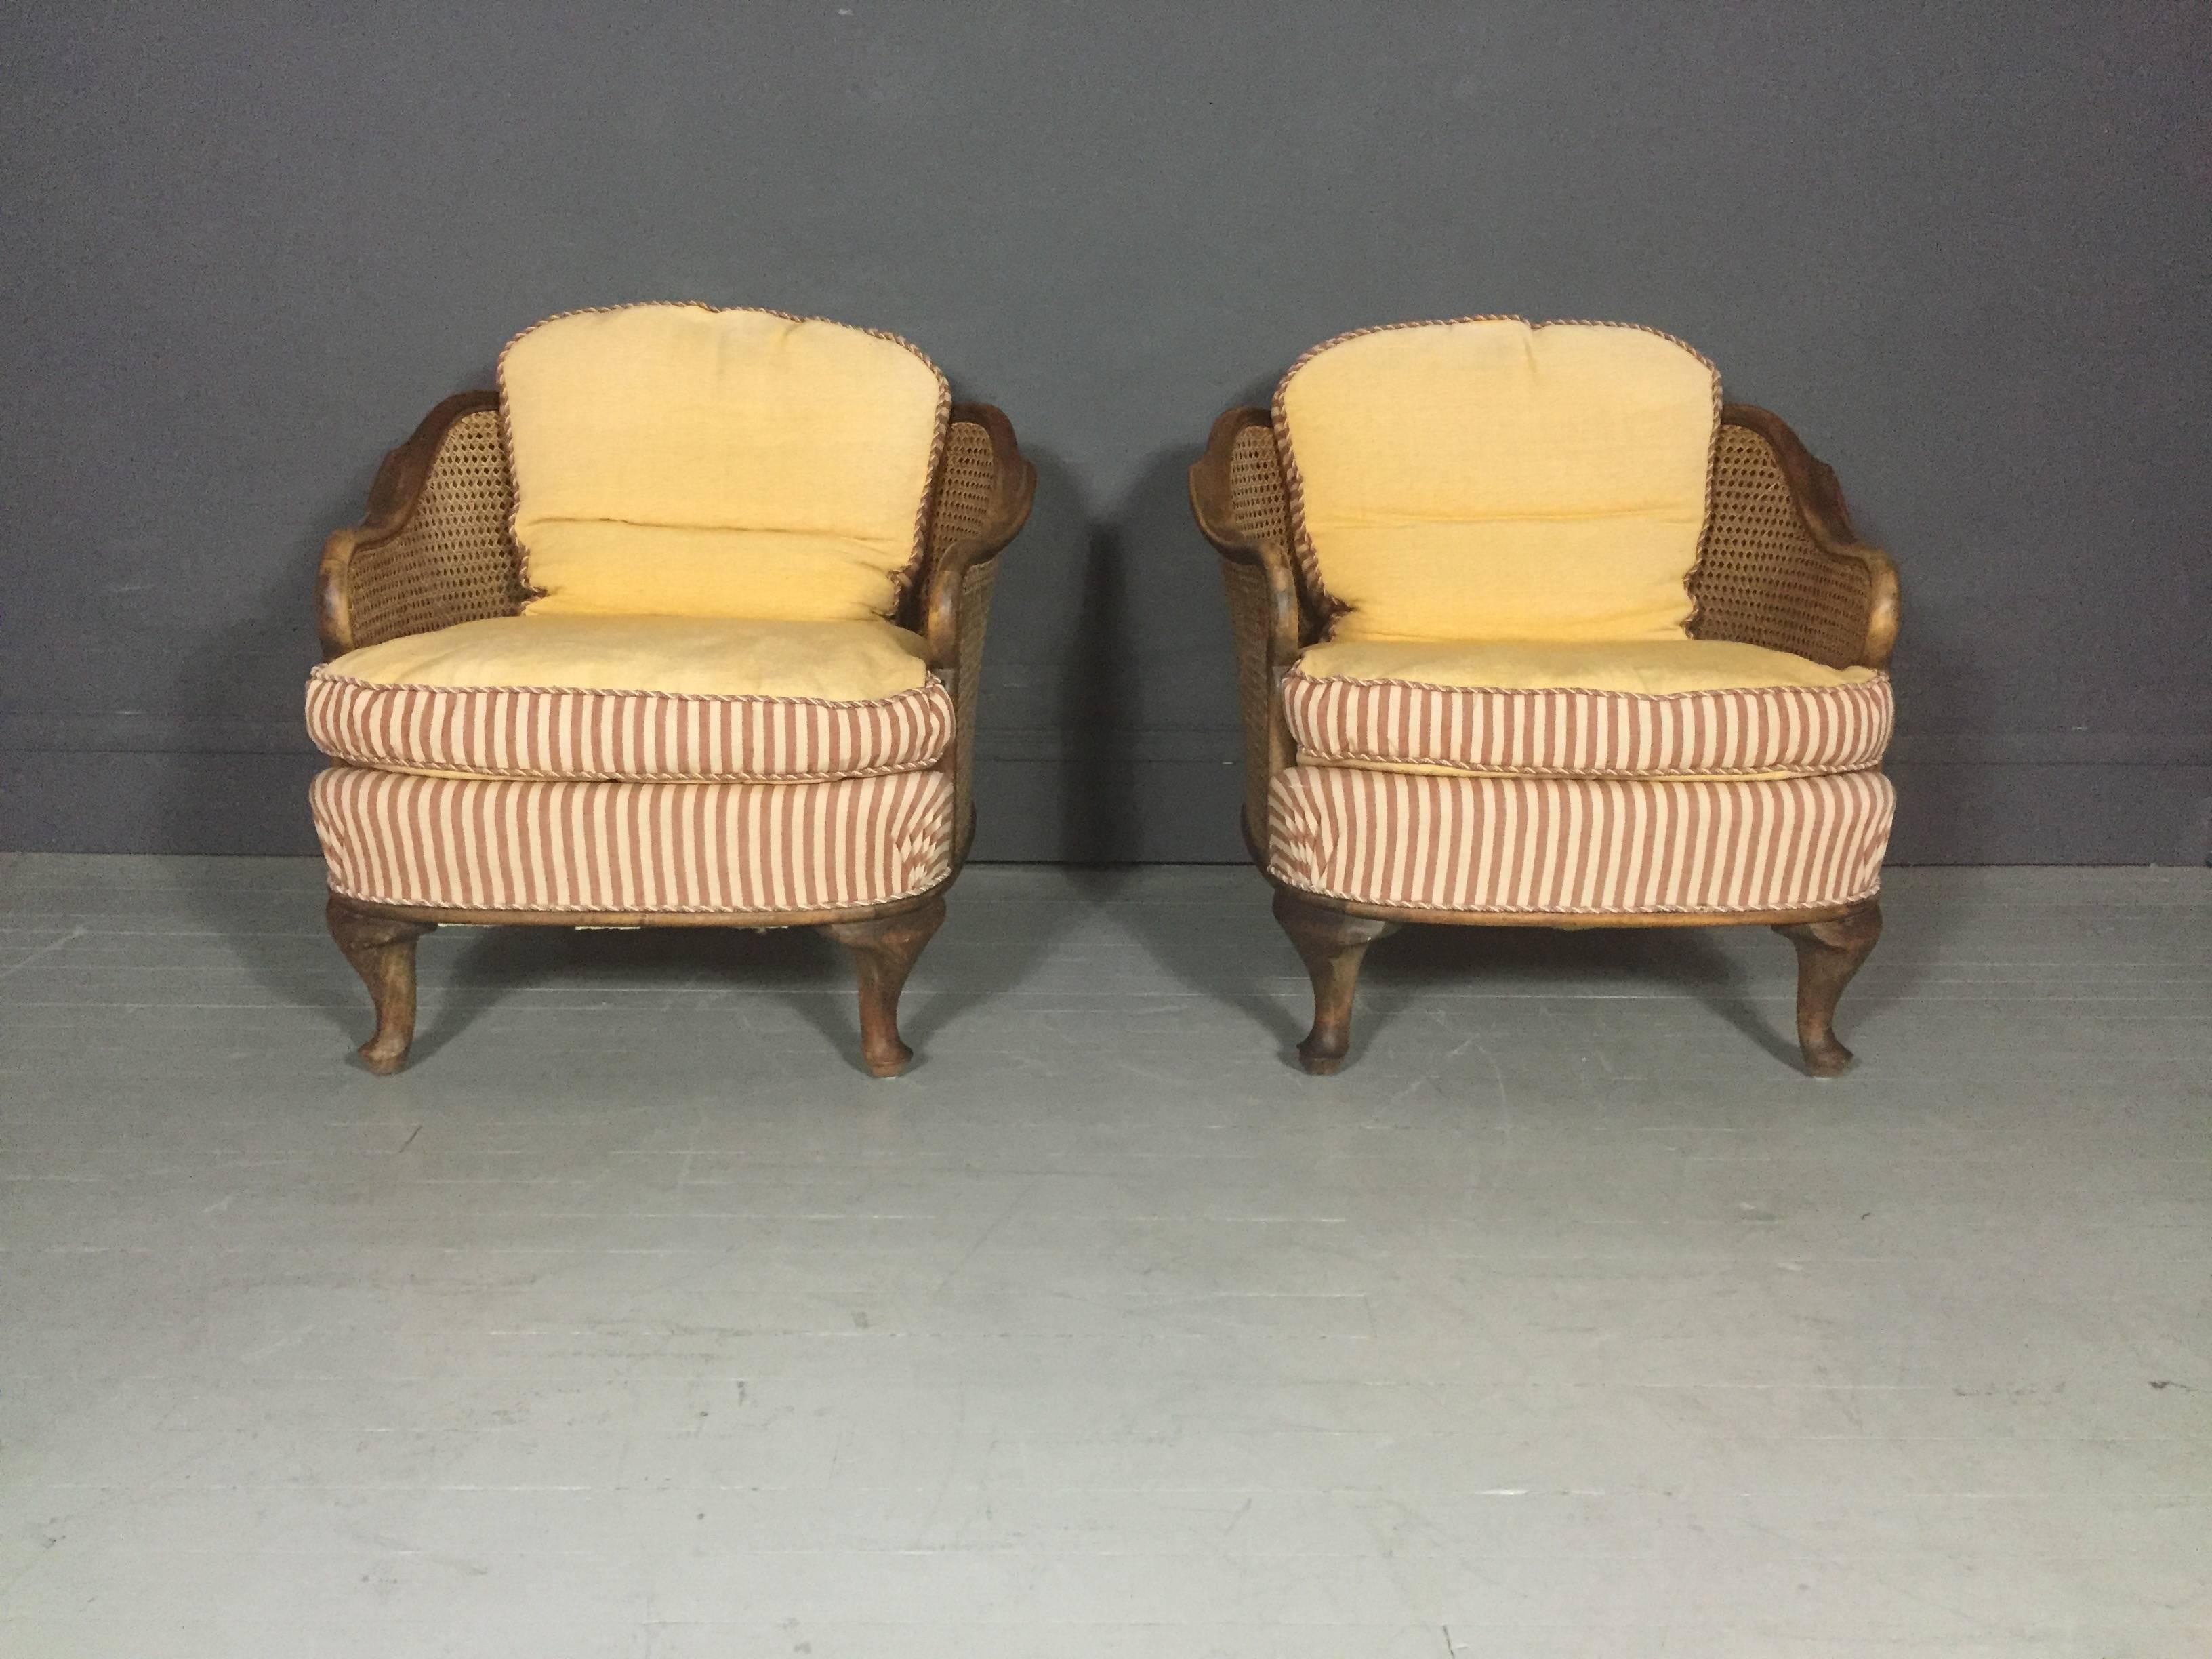 Swedish Pair of Bergere Tub Chairs, Walnut and Cane, Sweden, 1930s